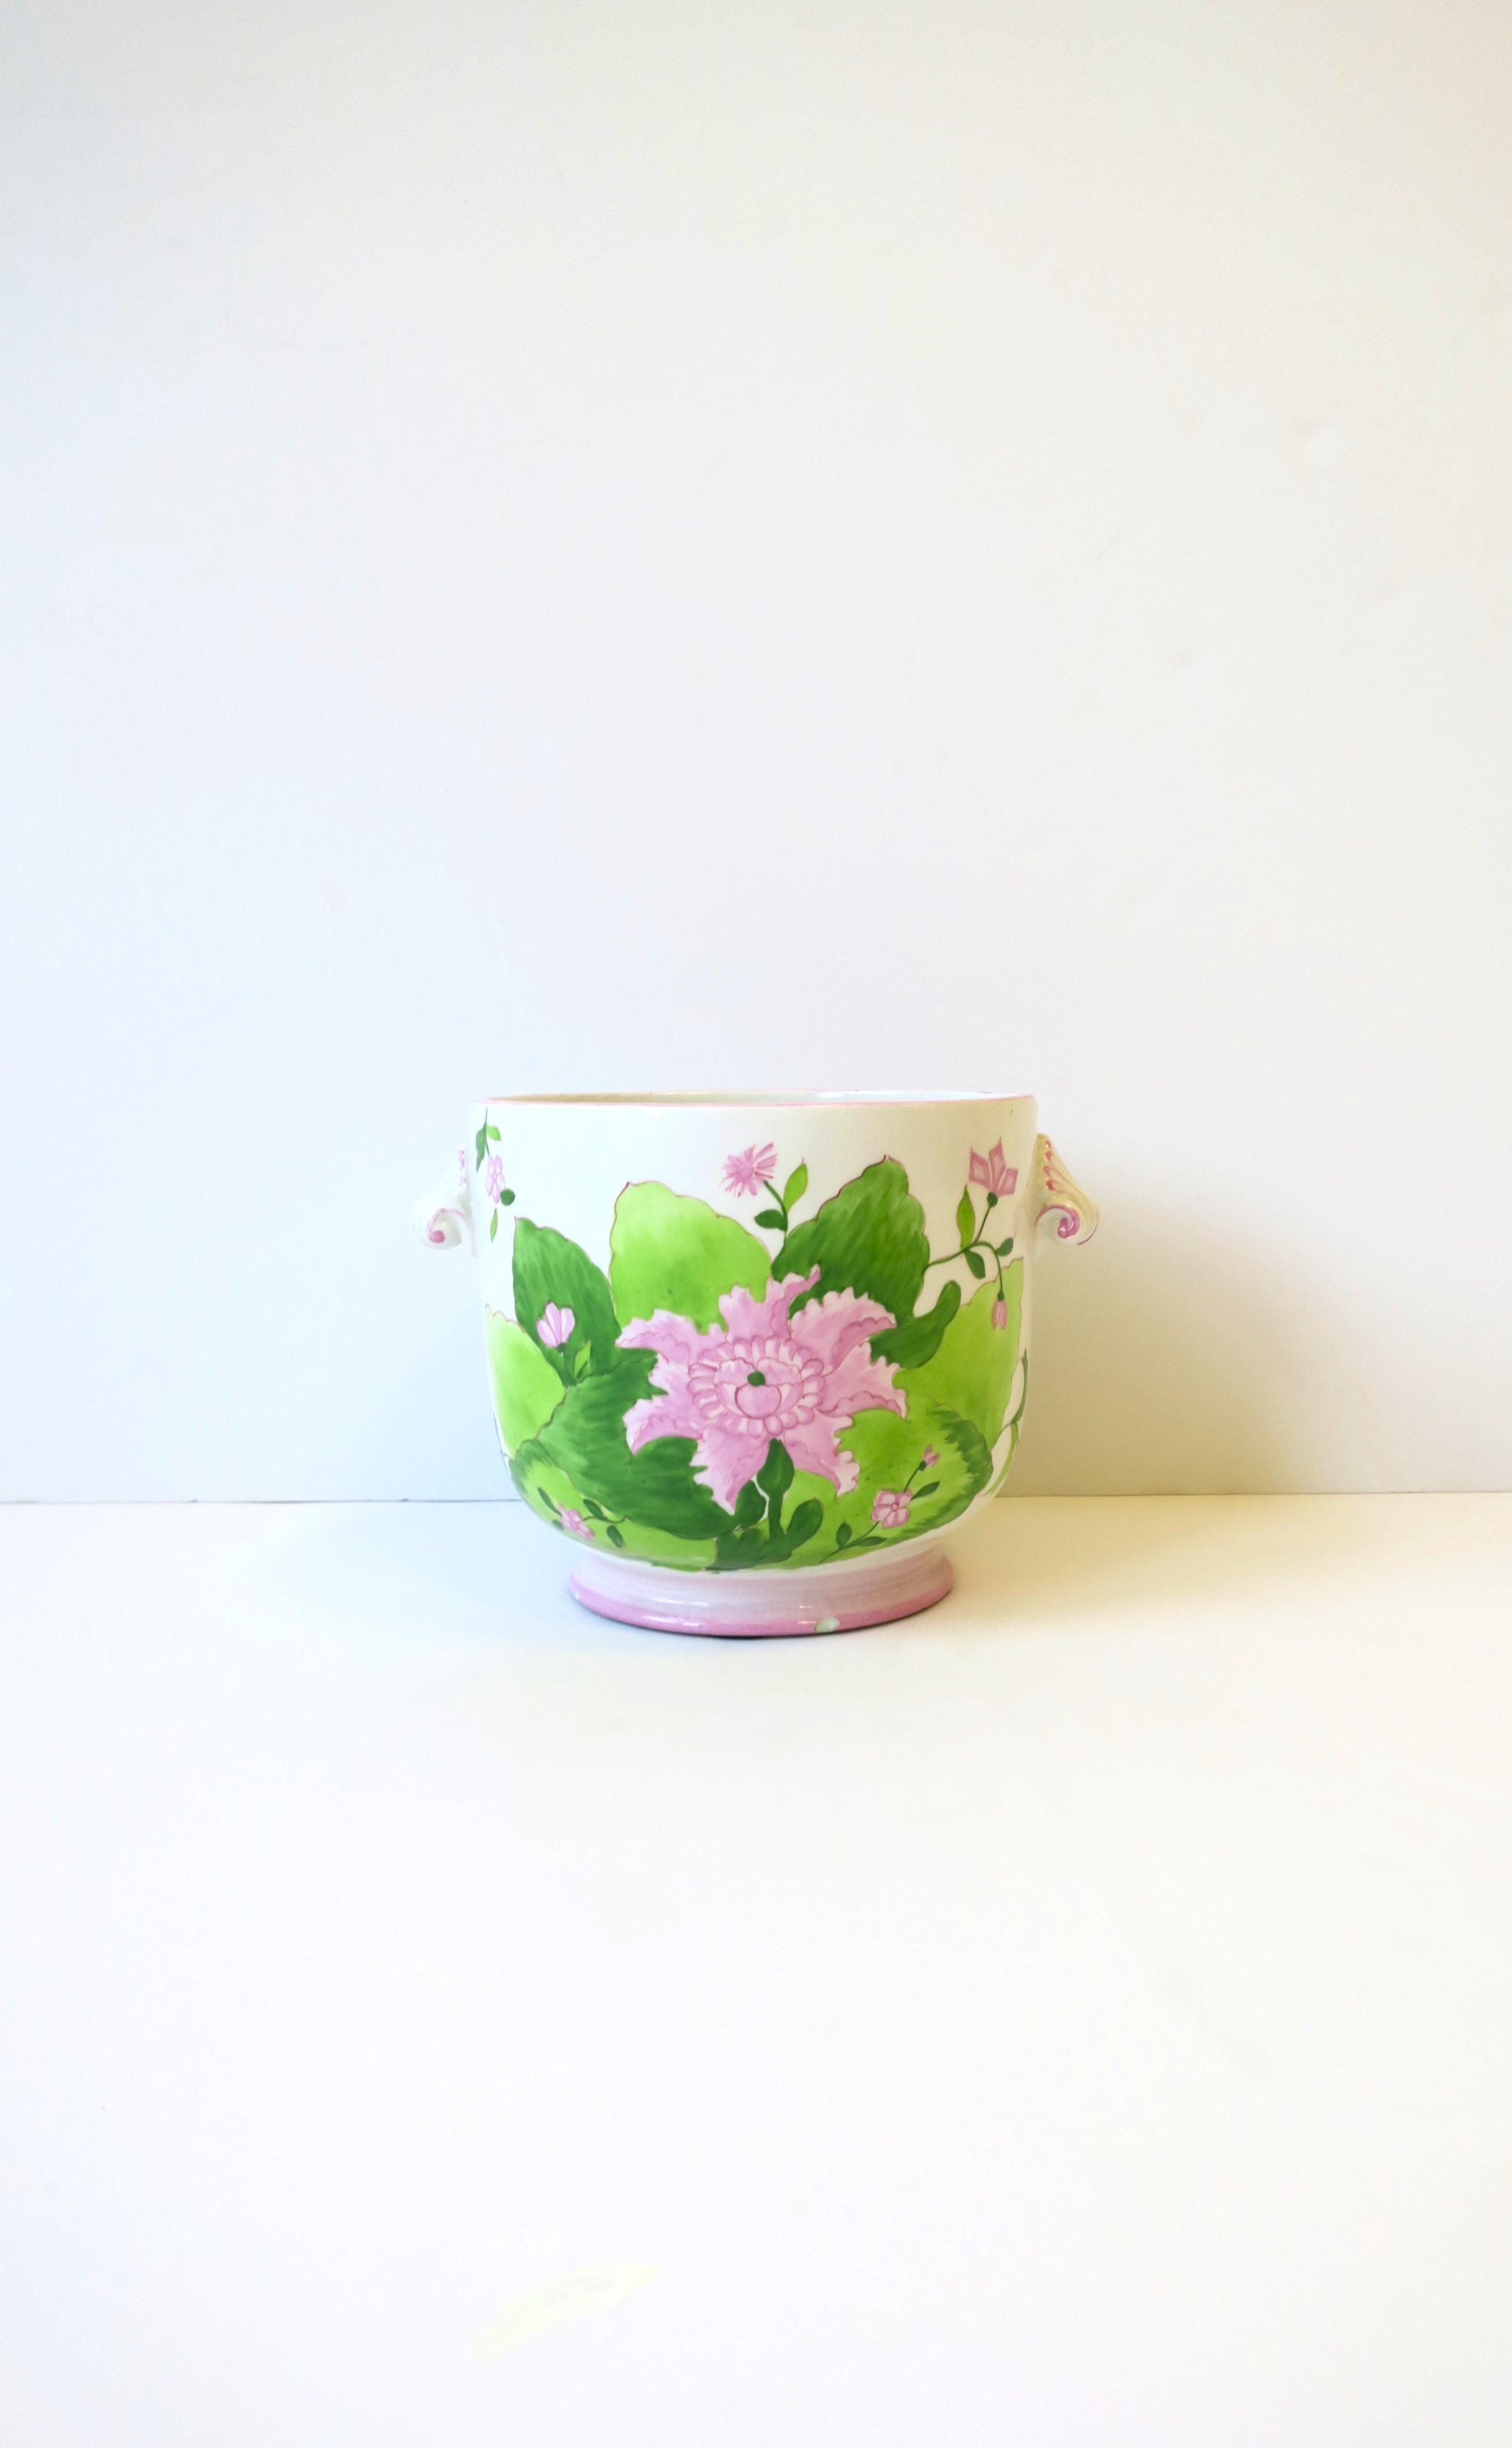 An Italian white ceramic flower or plant cachepot planter jardiniere holder with pink and green flowers and leaves, circa late-20th century, Italy. Piece has a floral design on front and back with scroll handles on sides. Pot has a 'Palm Beach'